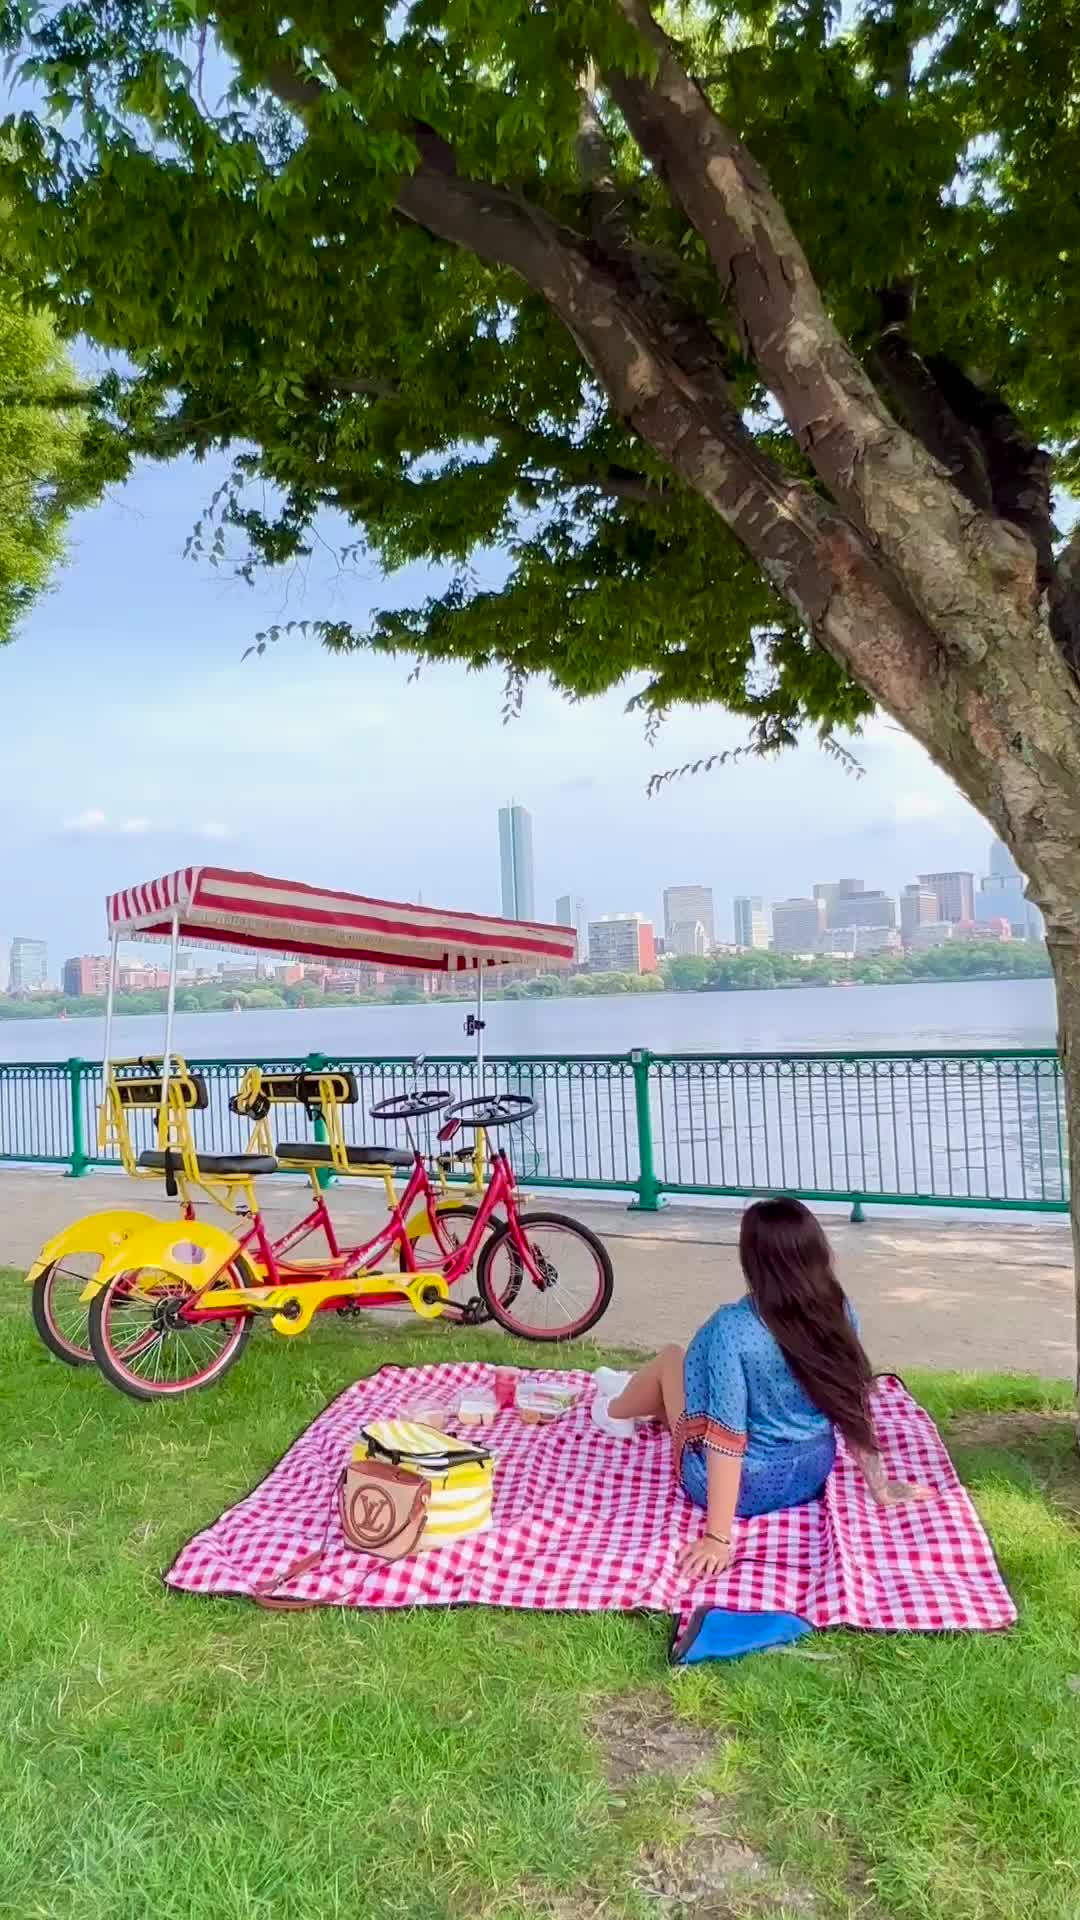 Summer in Boston: Cycling & Picnics by the Charles River